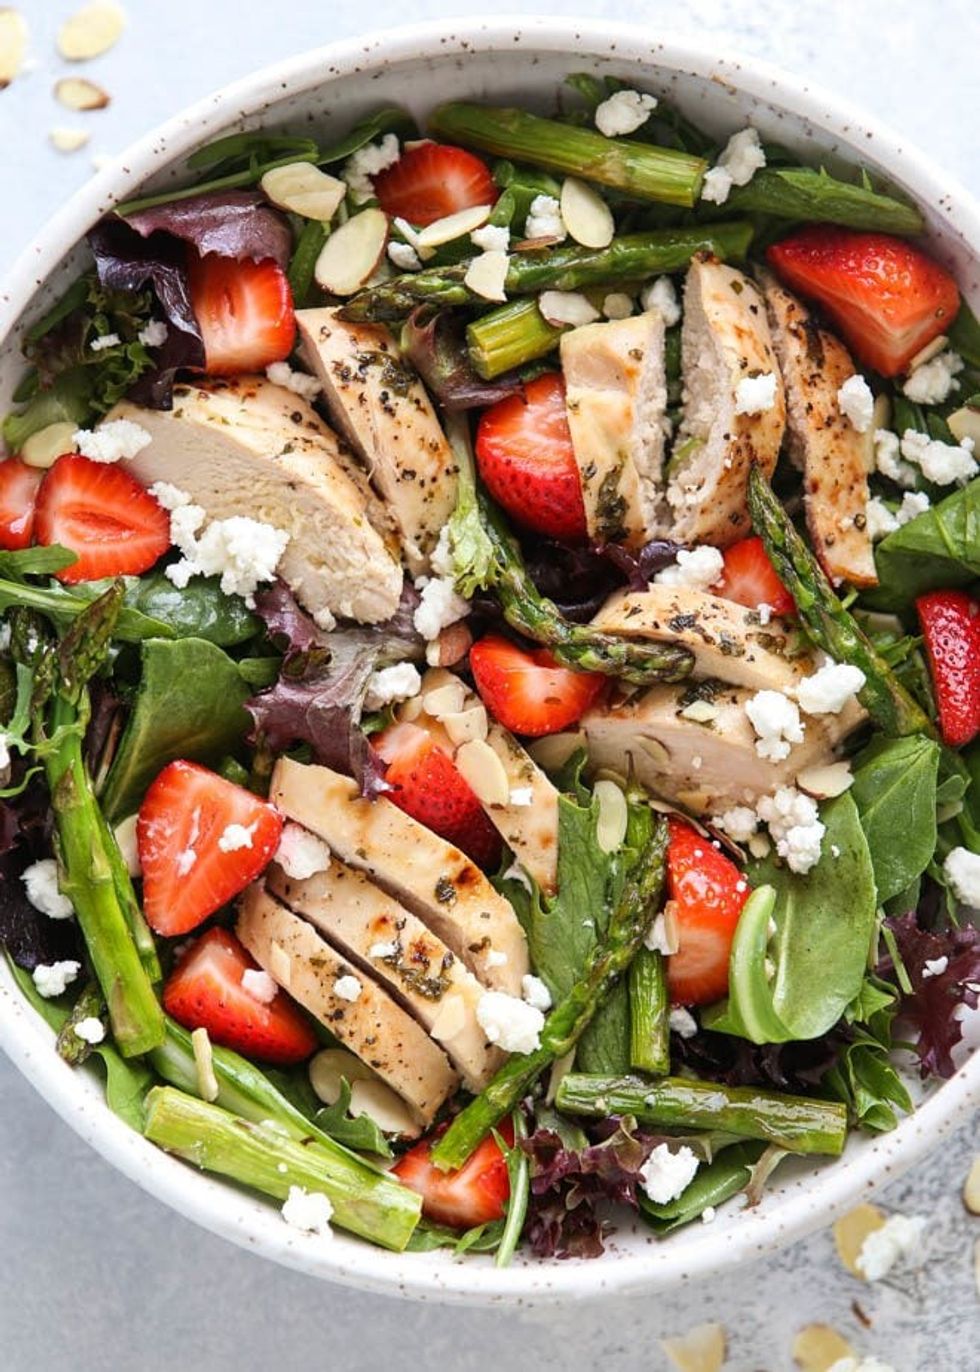 \u200bStrawberry and Asparagus Salad with Chicken